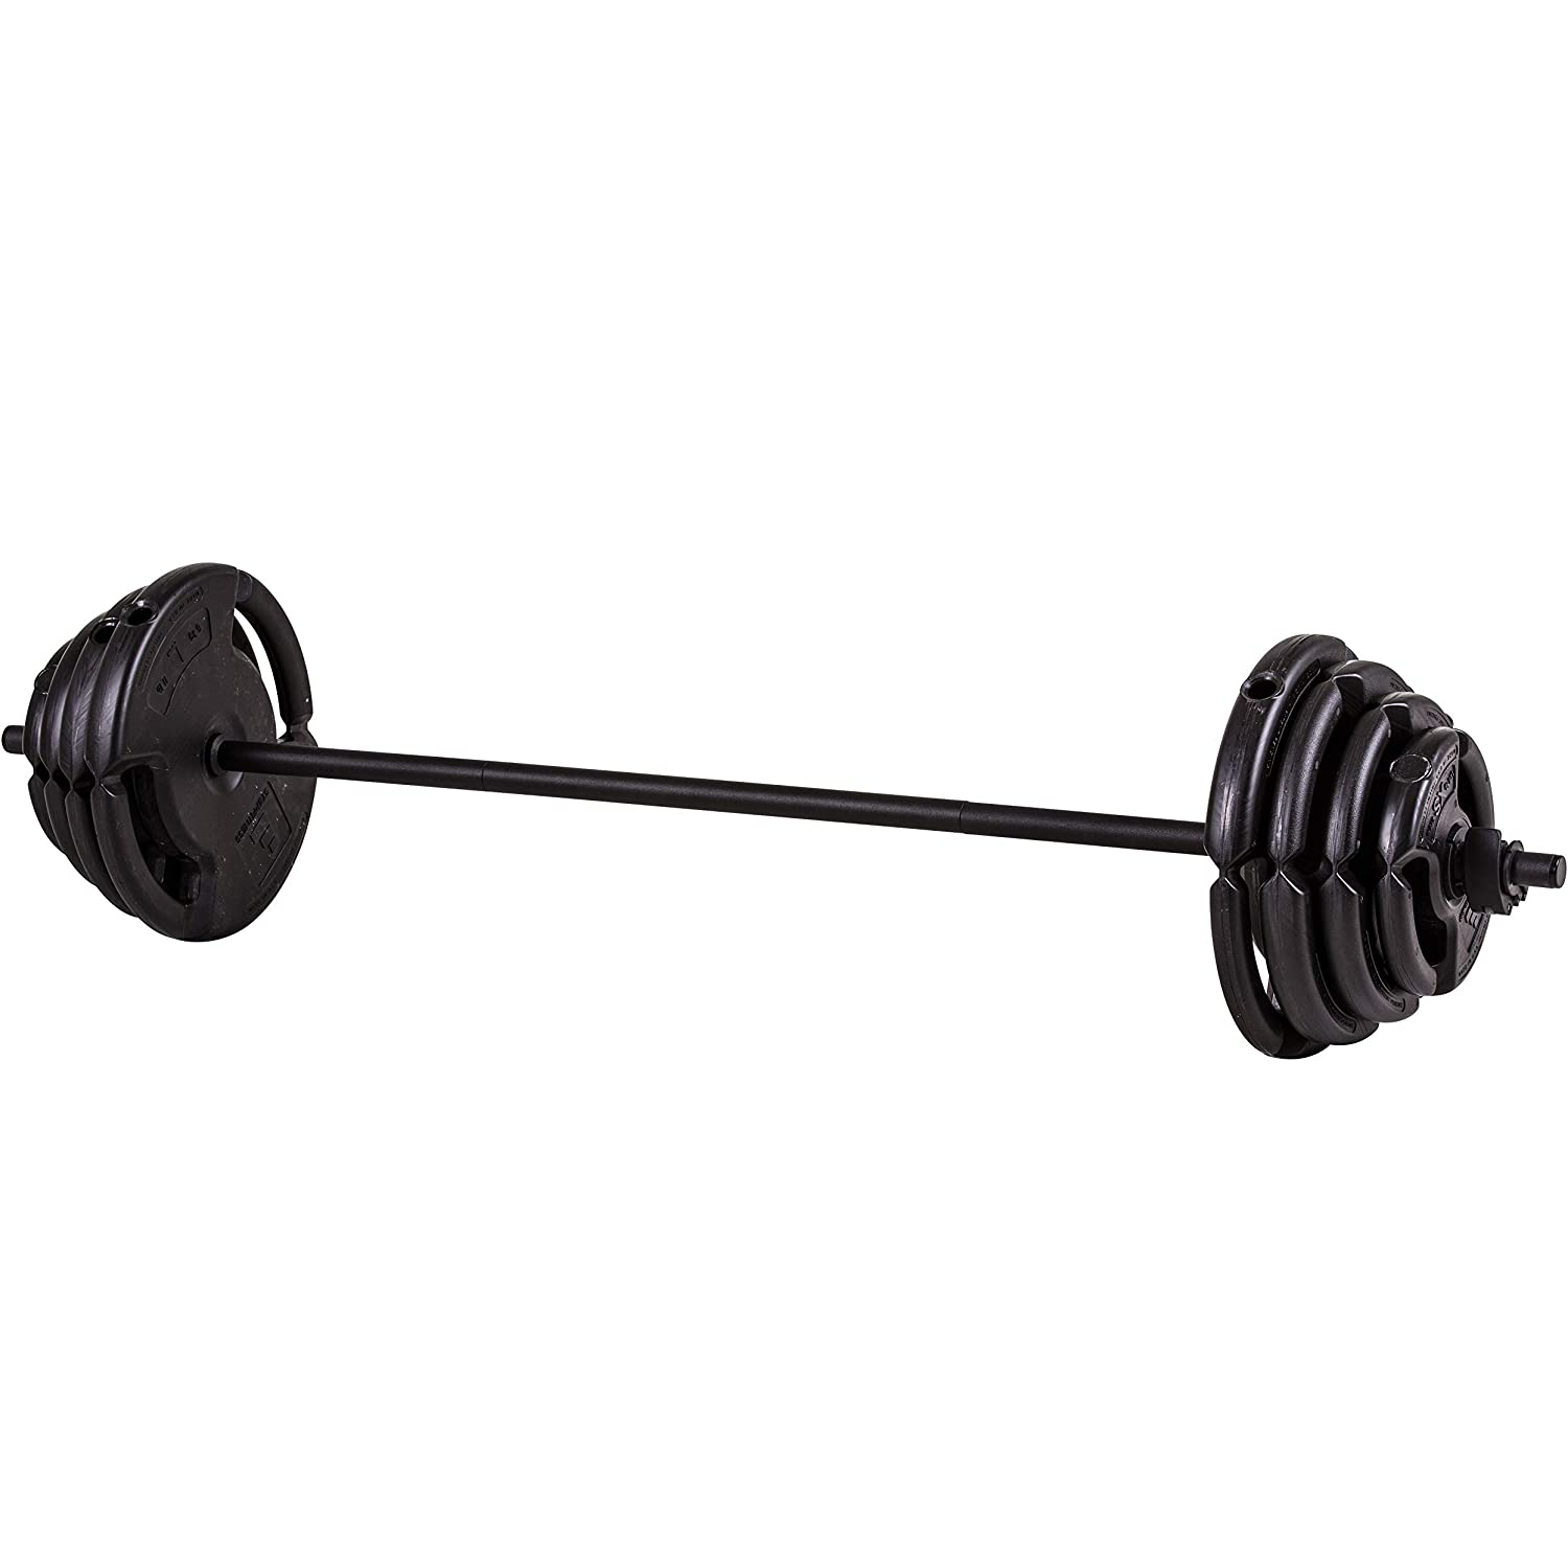 The Step Fitness Deluxe Barbell Weight Set